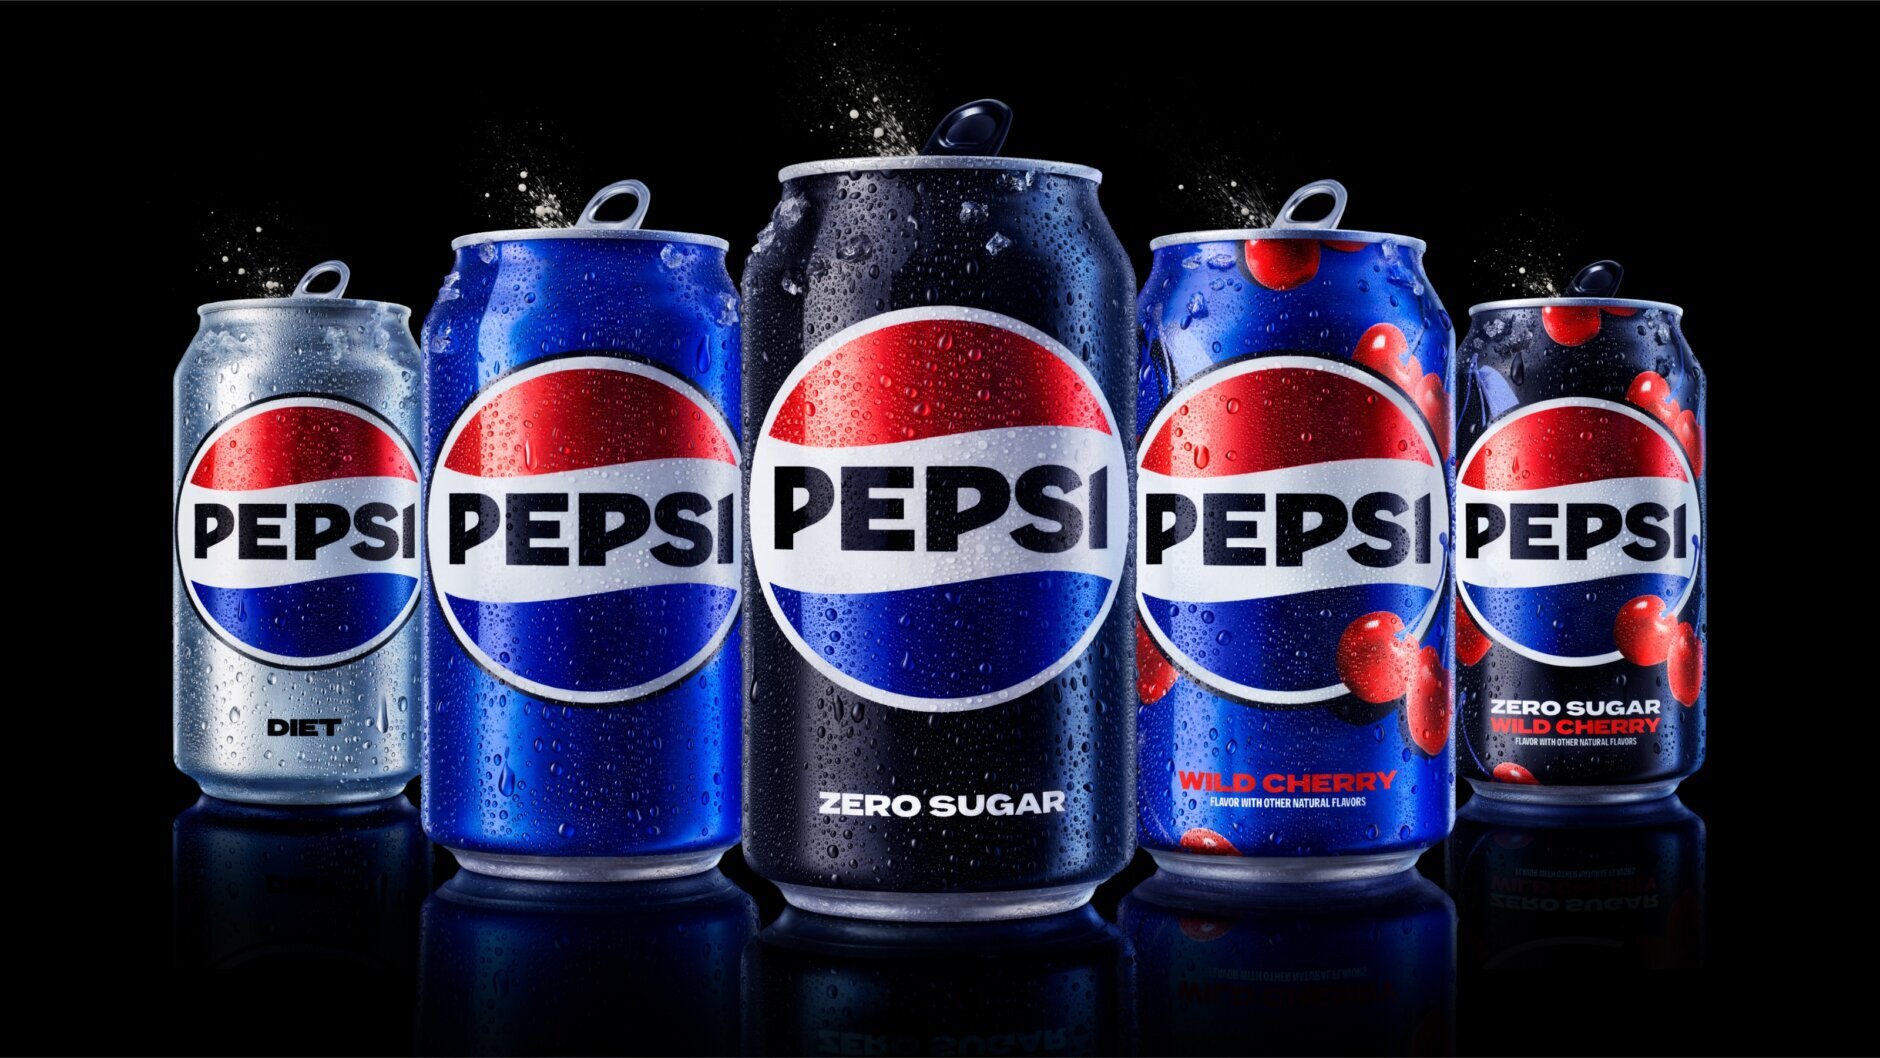 Pepsi is leaning into its zero-sugar line.